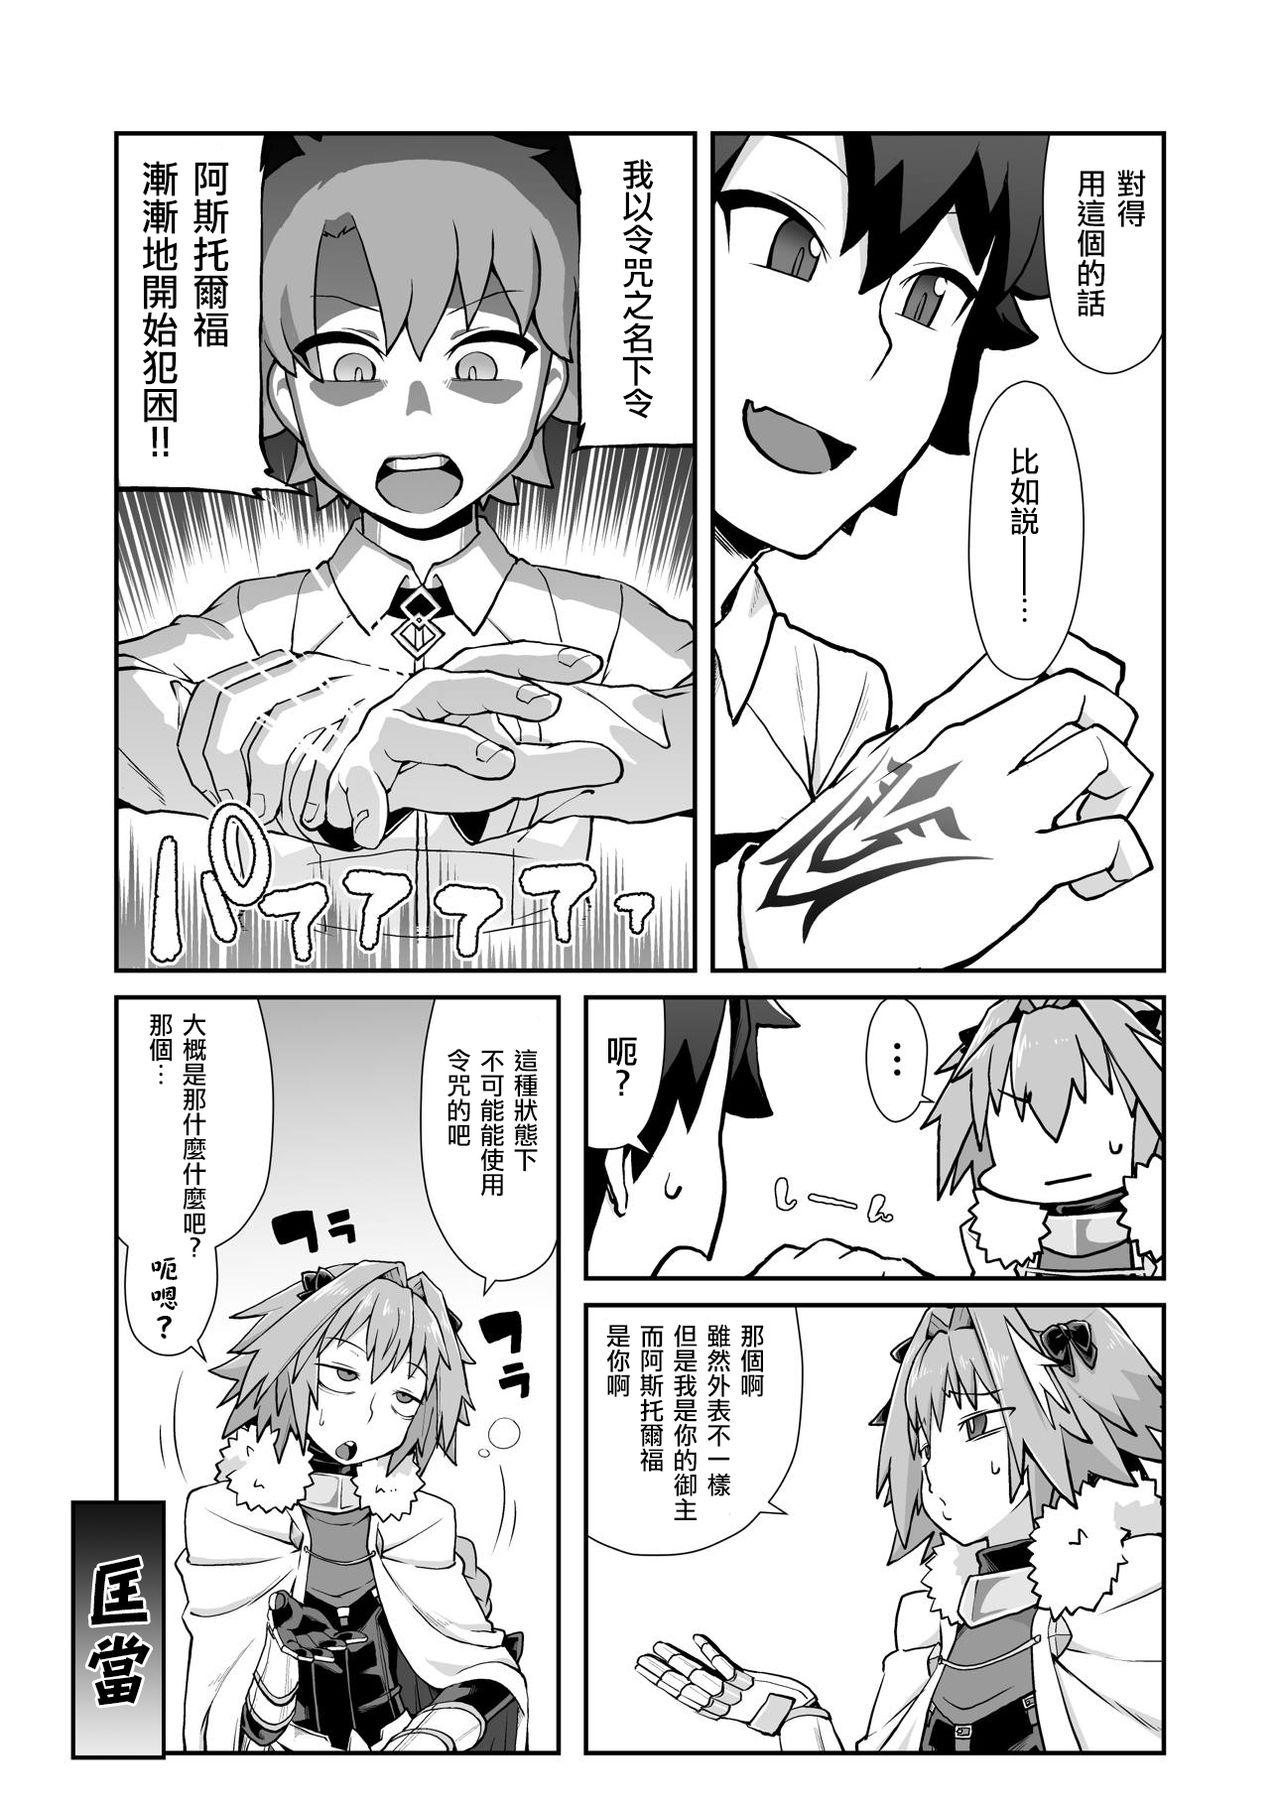 Boobs Master Change - Fate grand order Atm - Page 6